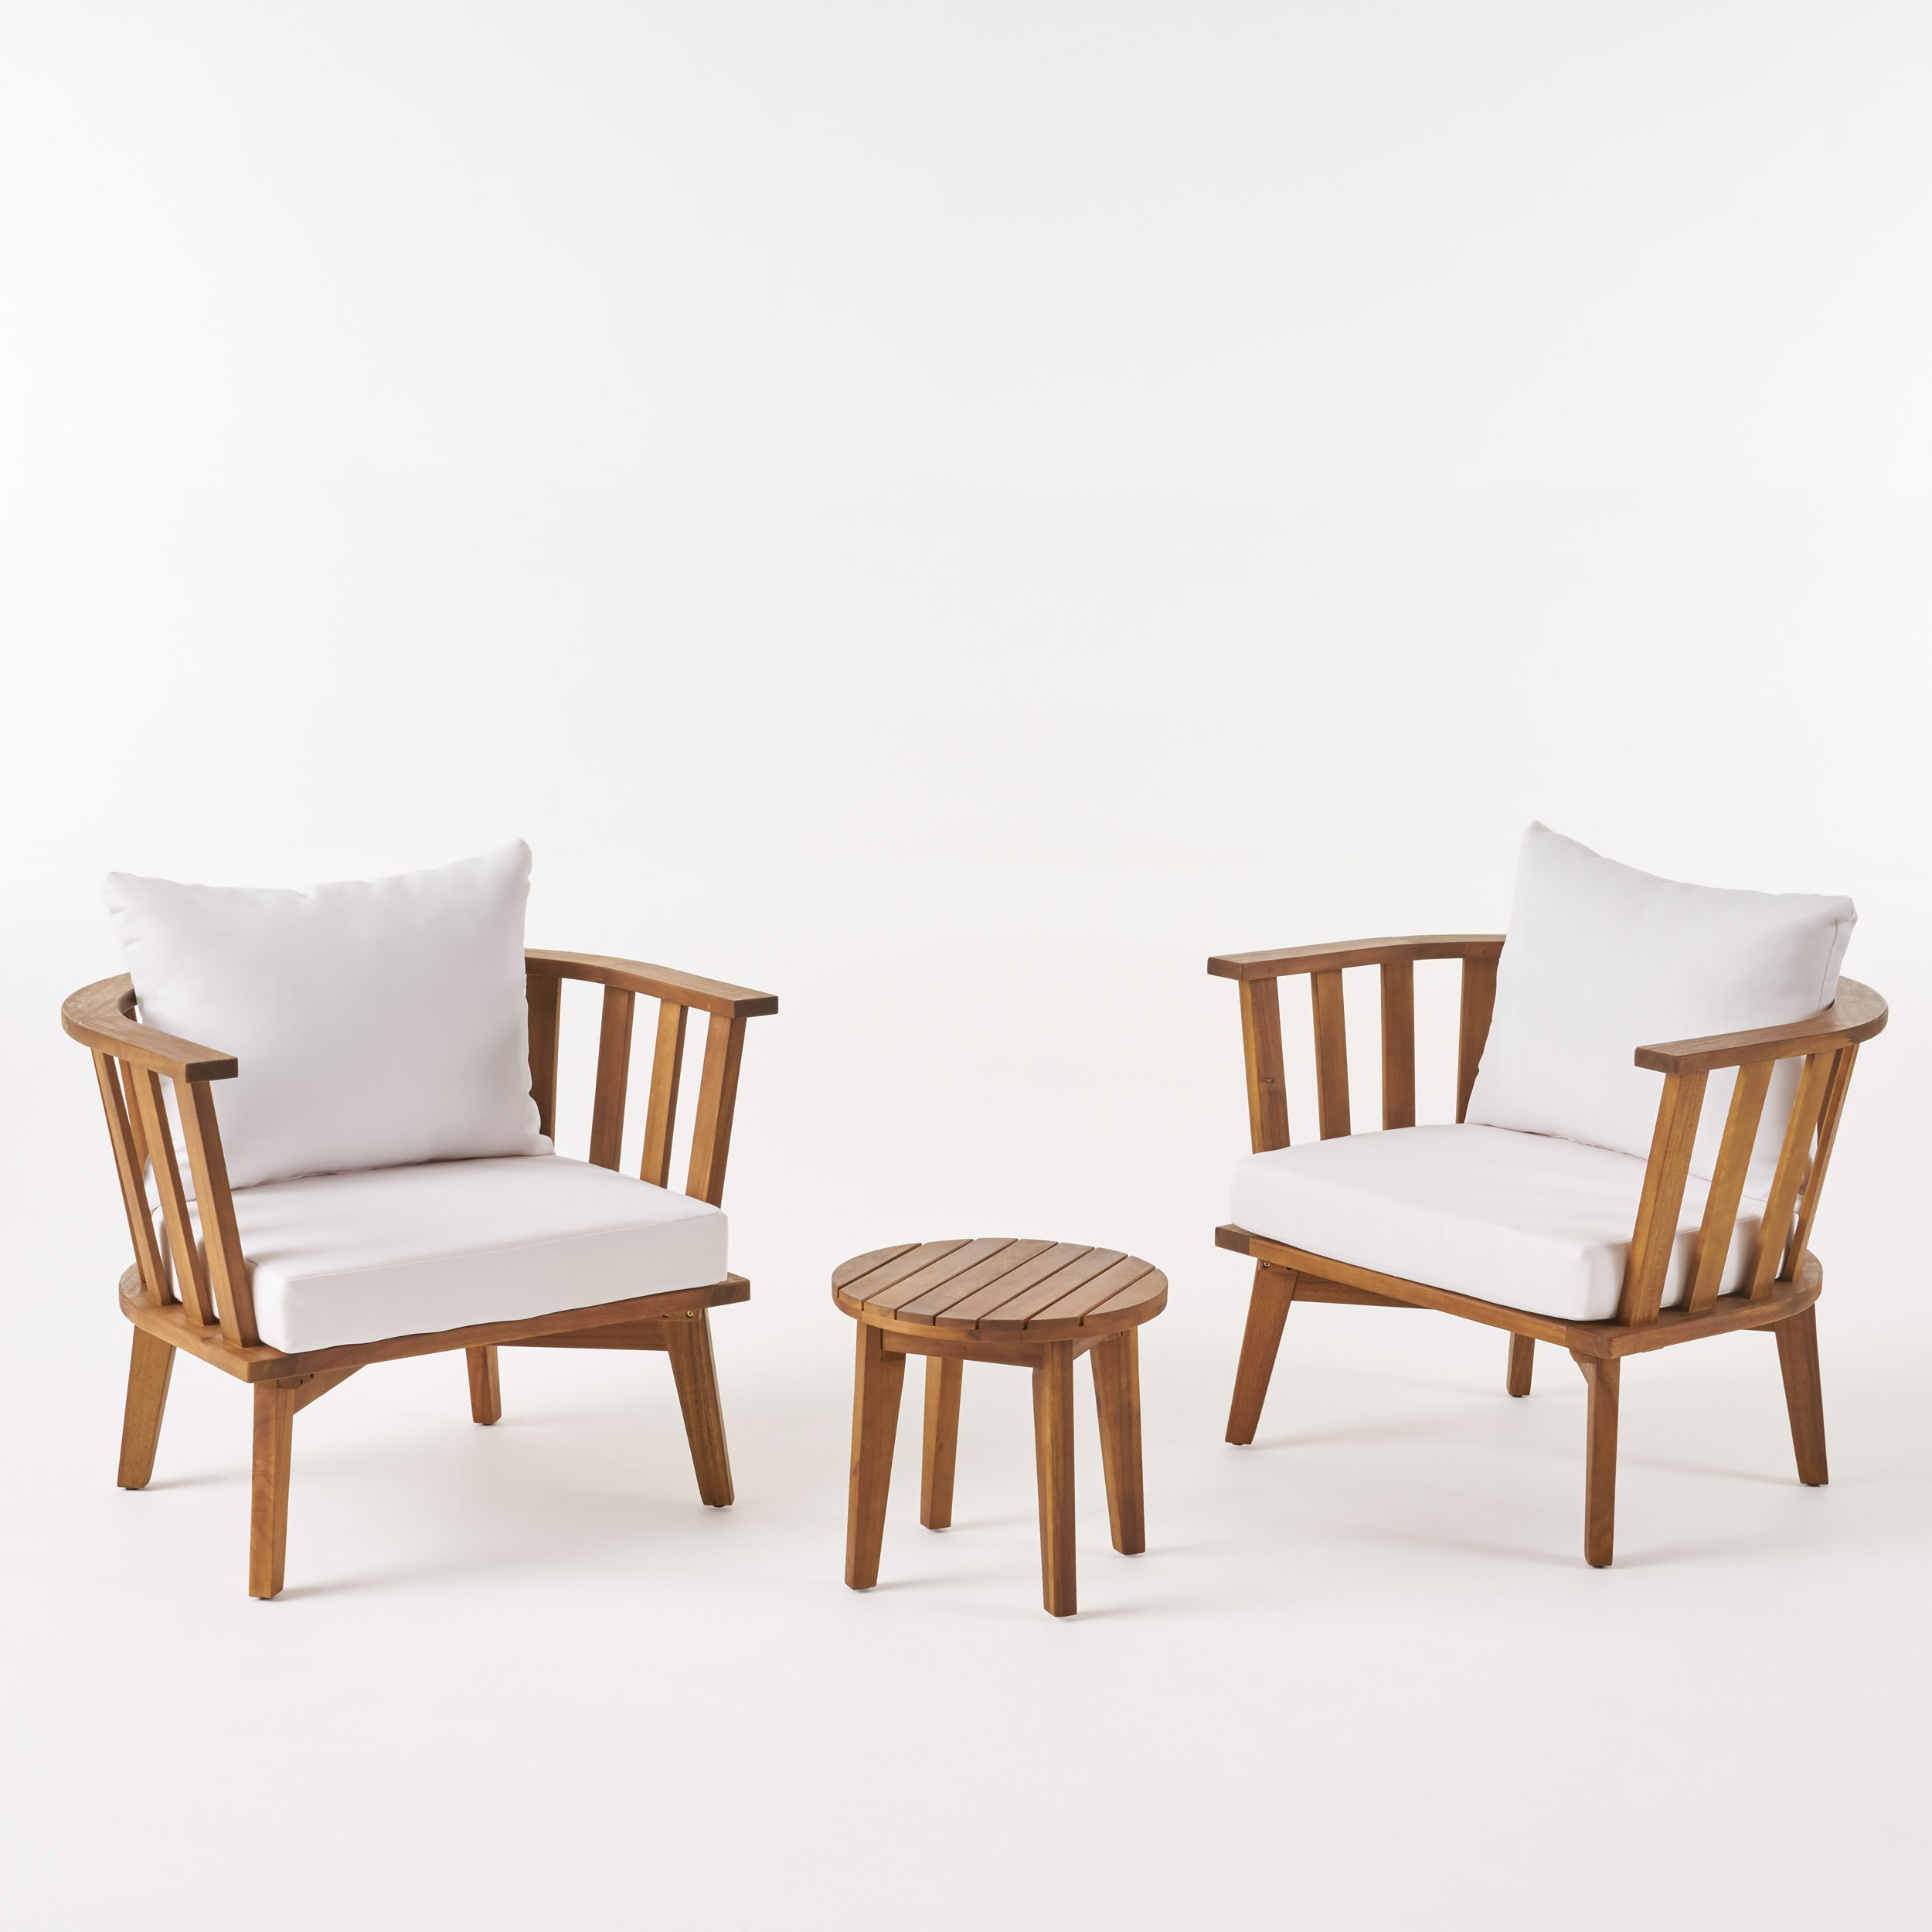 Noble House Chilian Outdoor  2 Seater Club Chairs and Side Table Set Teak - image 1 of 5